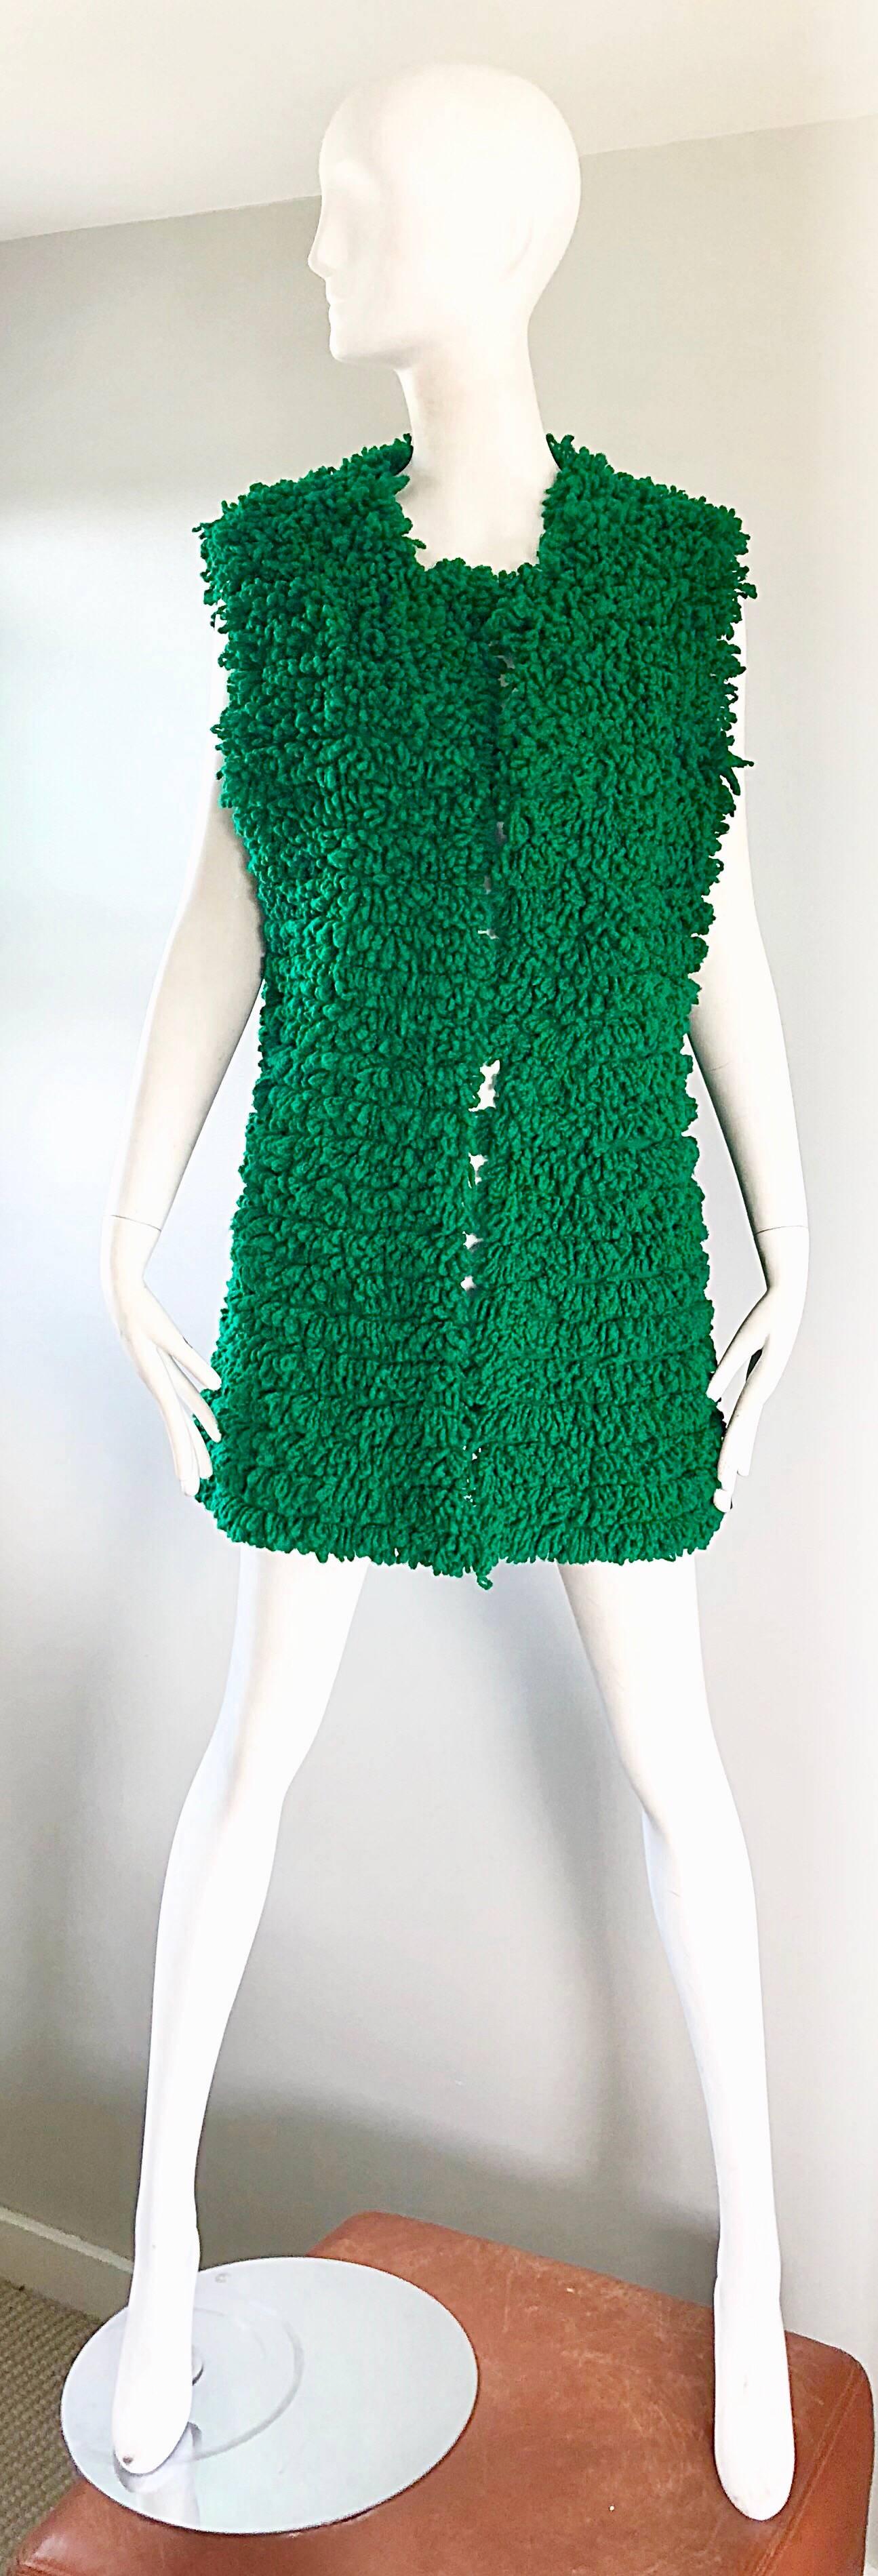 Amazingly chic 1970s DI COSTA kelly green 'shag carpet' mod wool open front vest! The perfect happy bright color to brighten anyone's day on a drab fall or winter day! Soft virgin wool, with hand-woven loops throughout. Looks great with jeans,